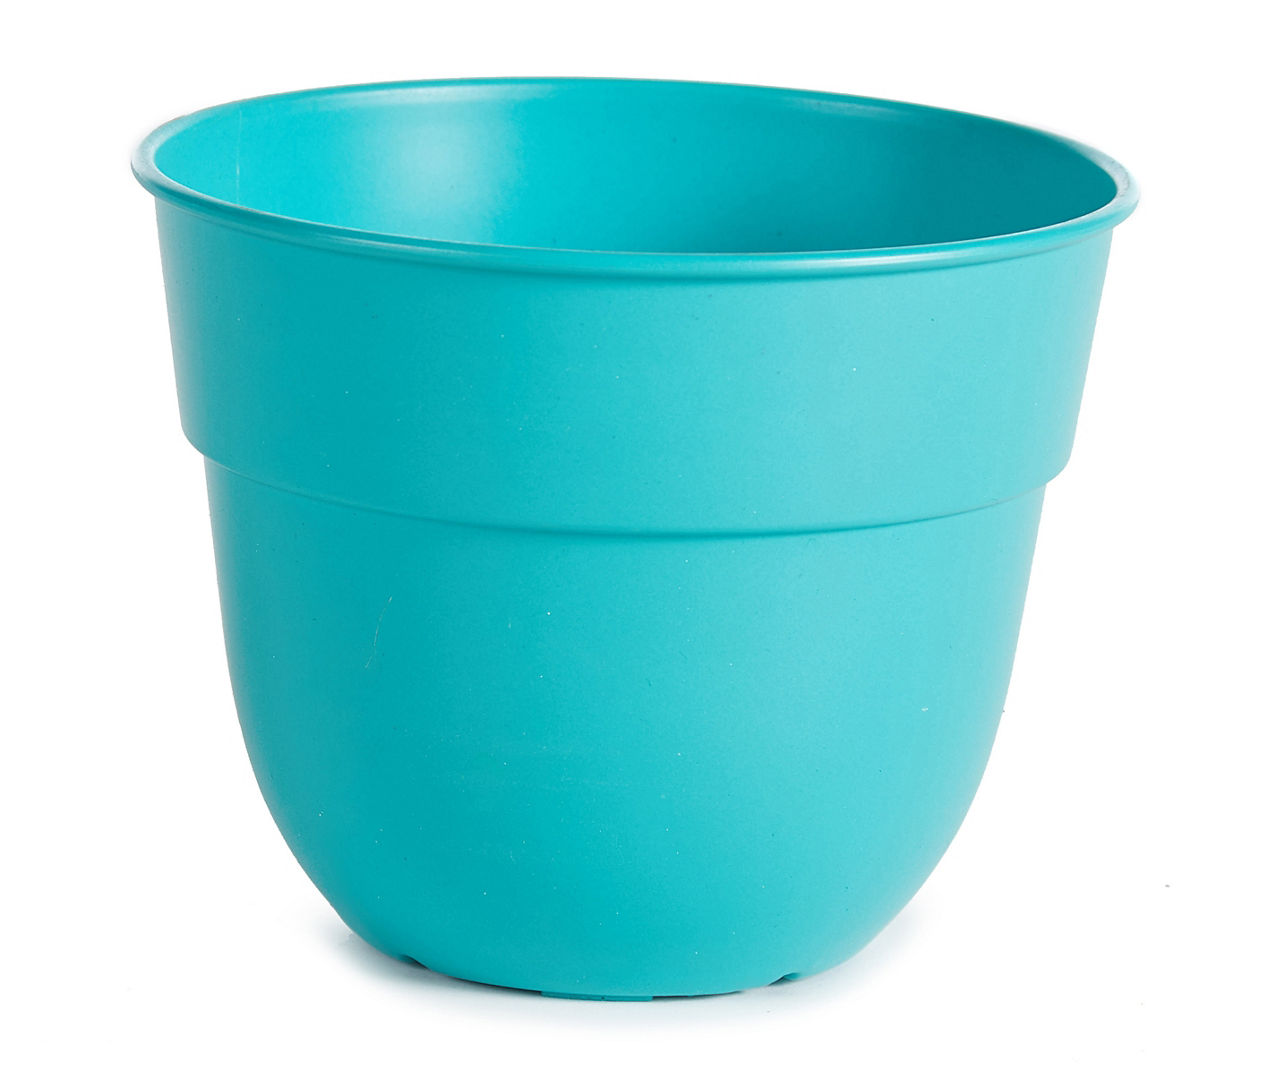 16" Teal Plastic Planter with Built-In Saucer